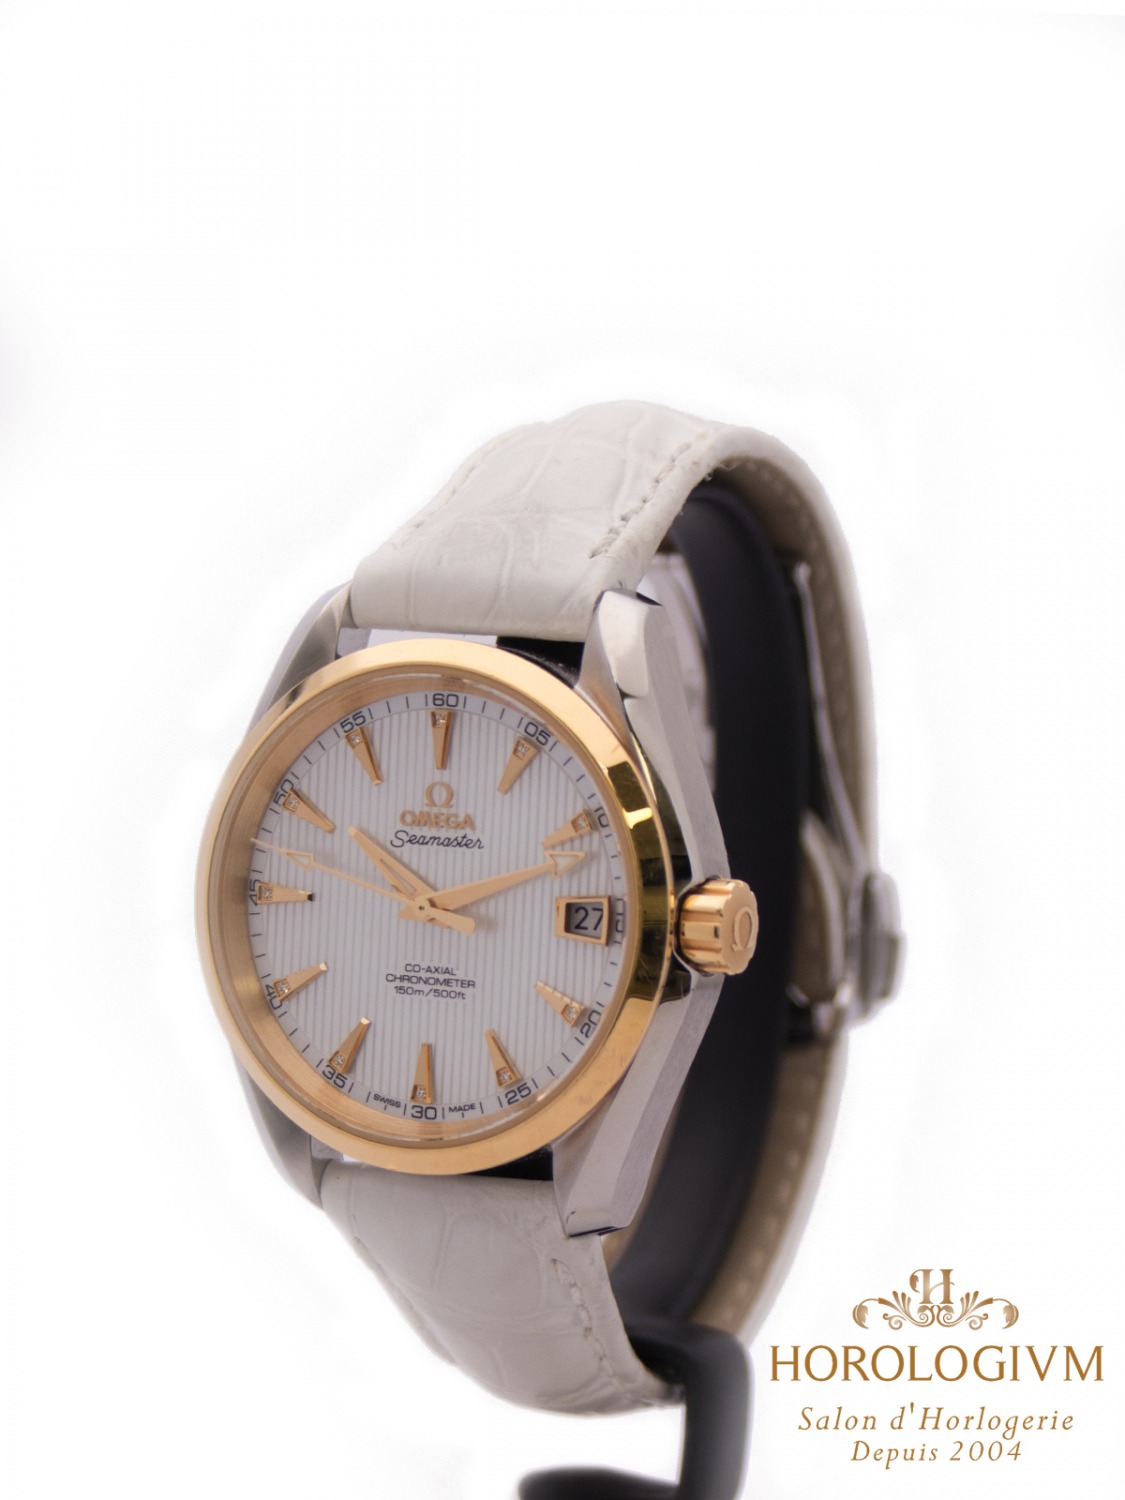 Omega Seamaster Aqua Terra 38MM Ref. 23123392155002 watch, two-tone (bi-colored) silver (case) and yellow gold (bezel)